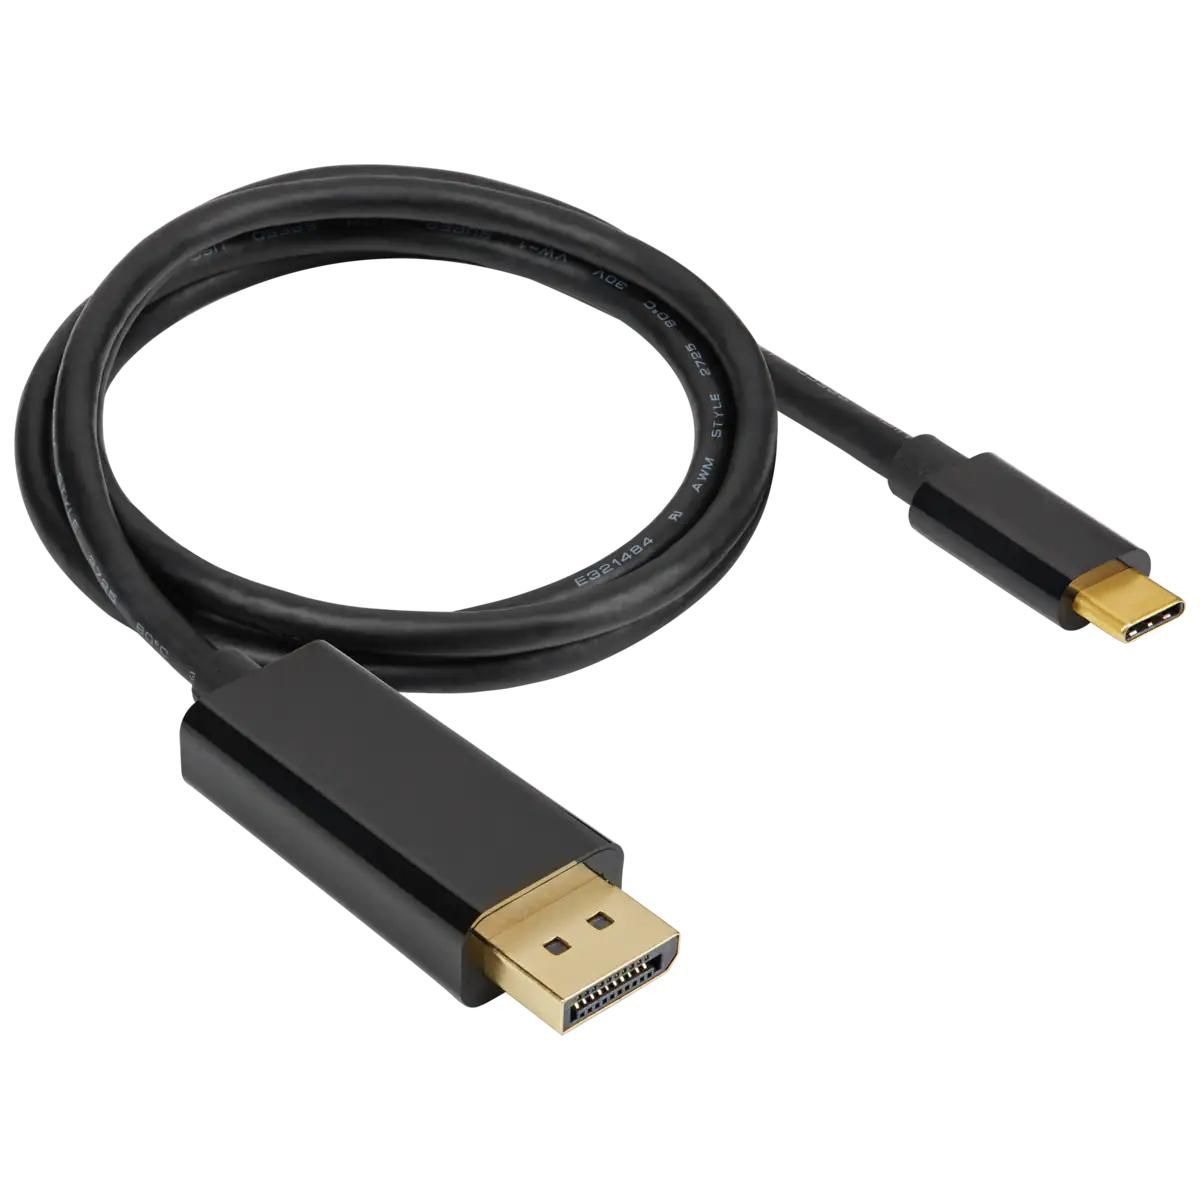 CORSAIR Video Cable Adapter 1 M Usb